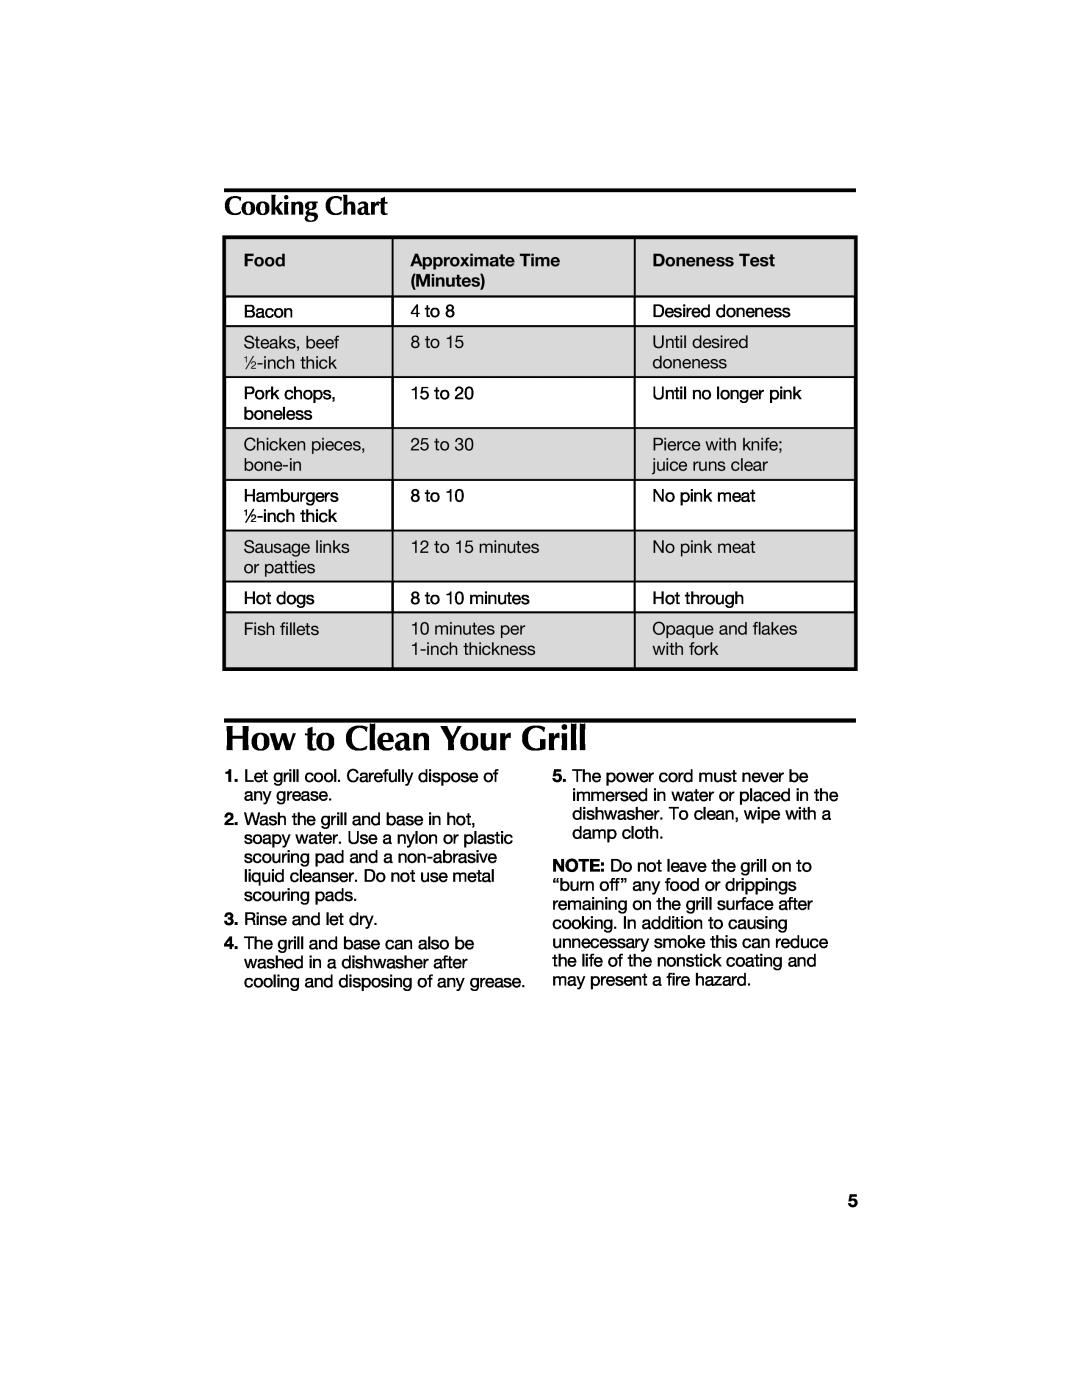 Hamilton Beach 840068300 manual How to Clean Your Grill, Cooking Chart, Food, Approximate Time, Doneness Test, Minutes 